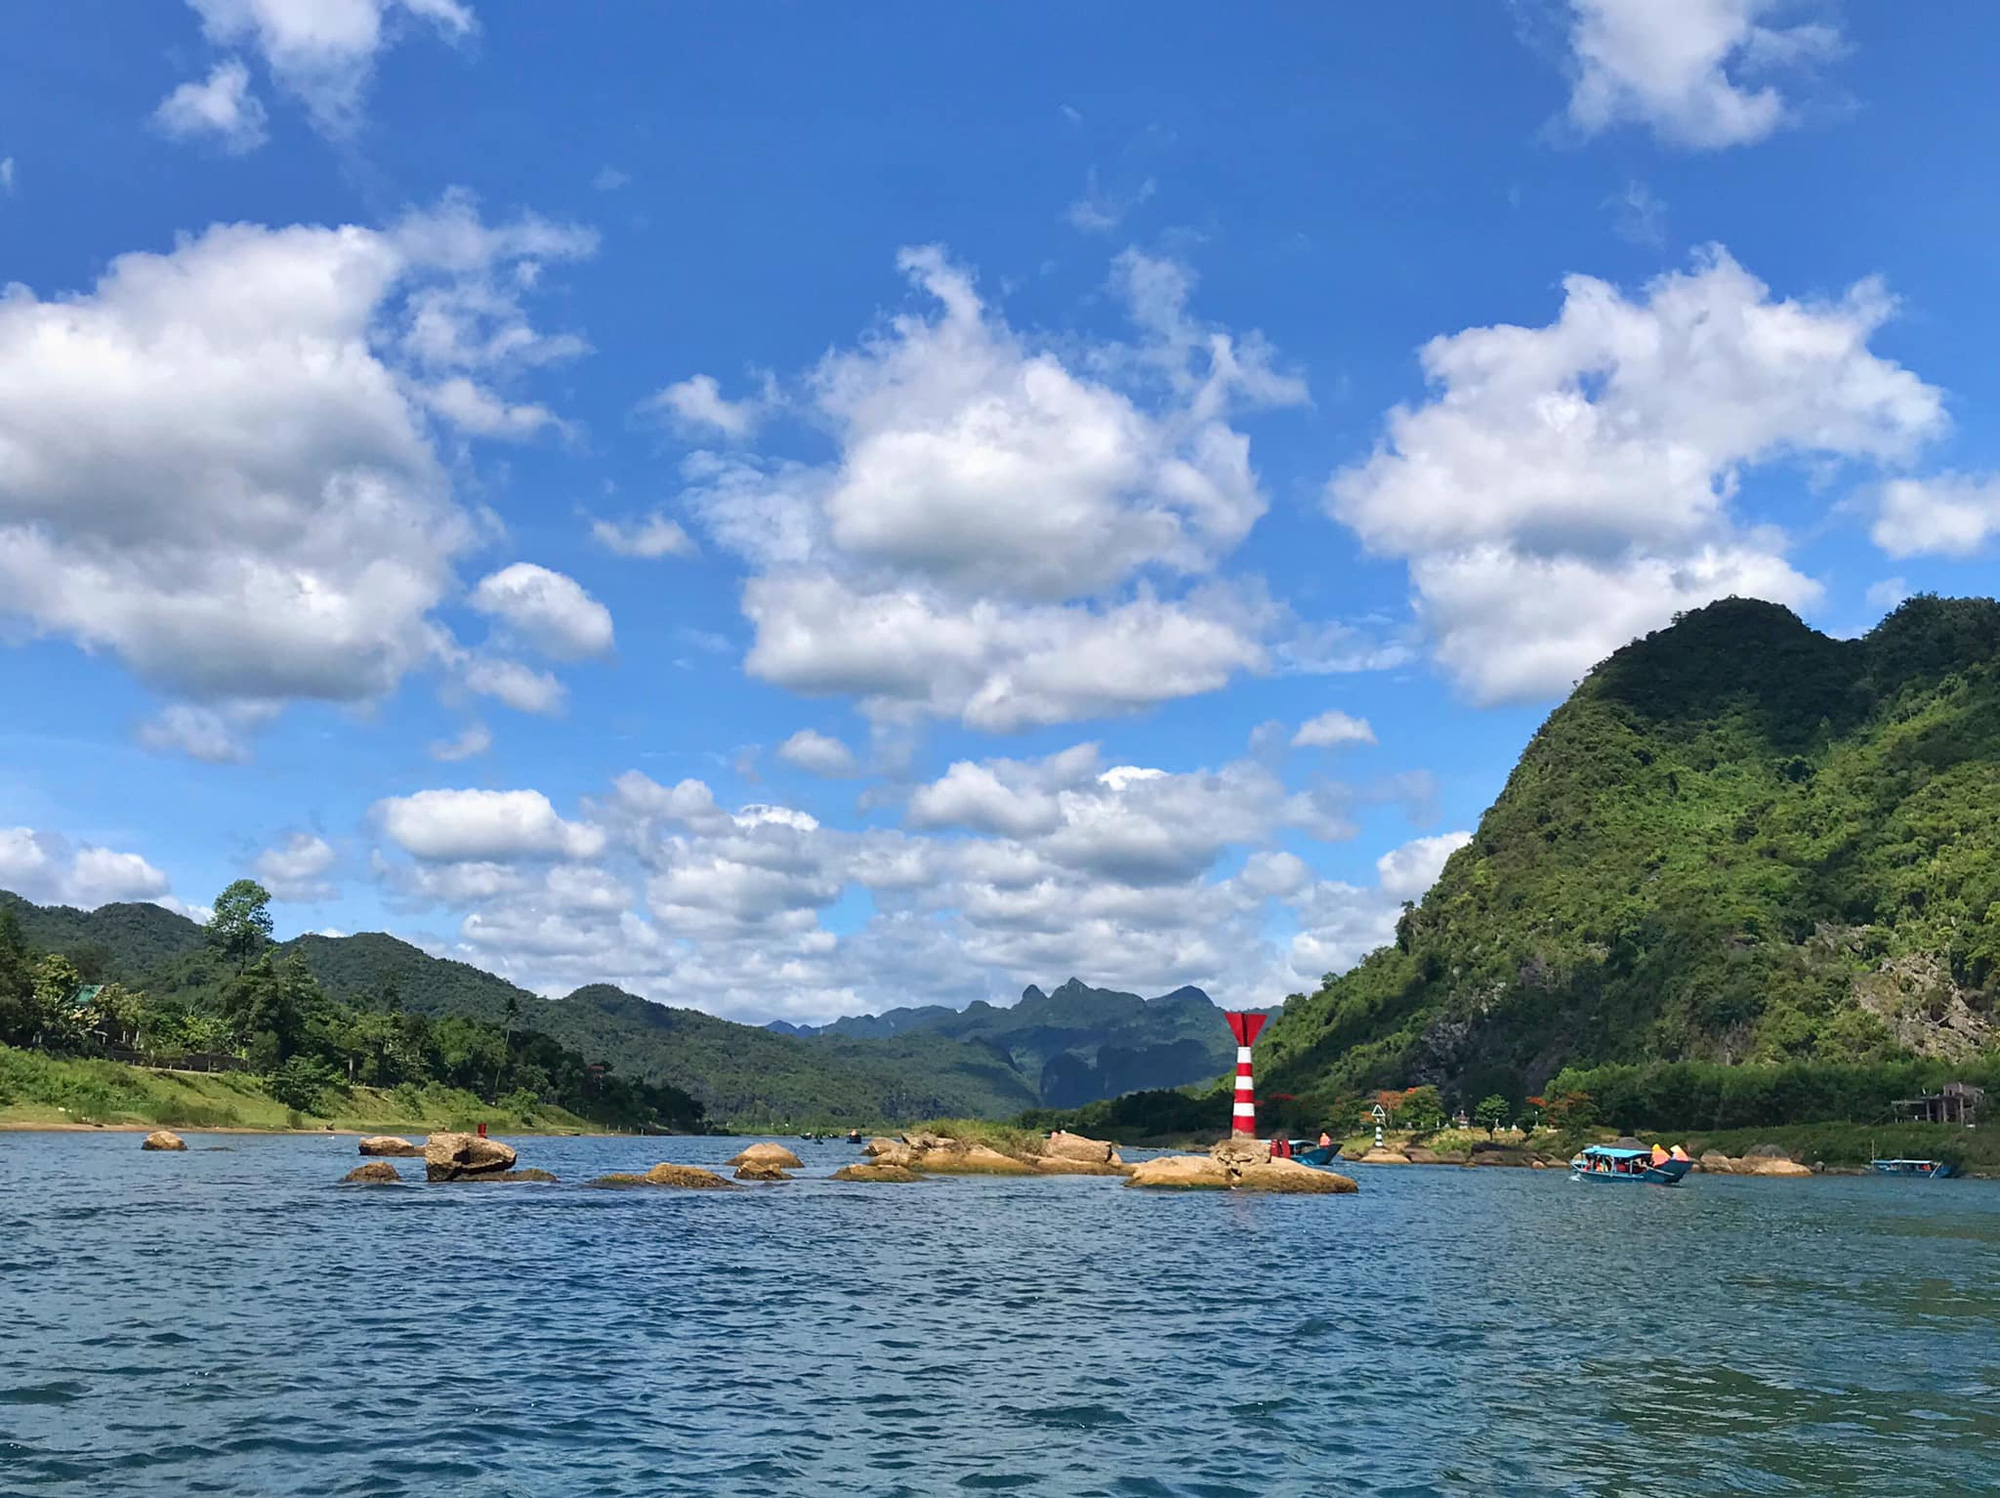 A view of the Son River leading to Phong Nha Cave in Quang Binh Province, Vietnam.